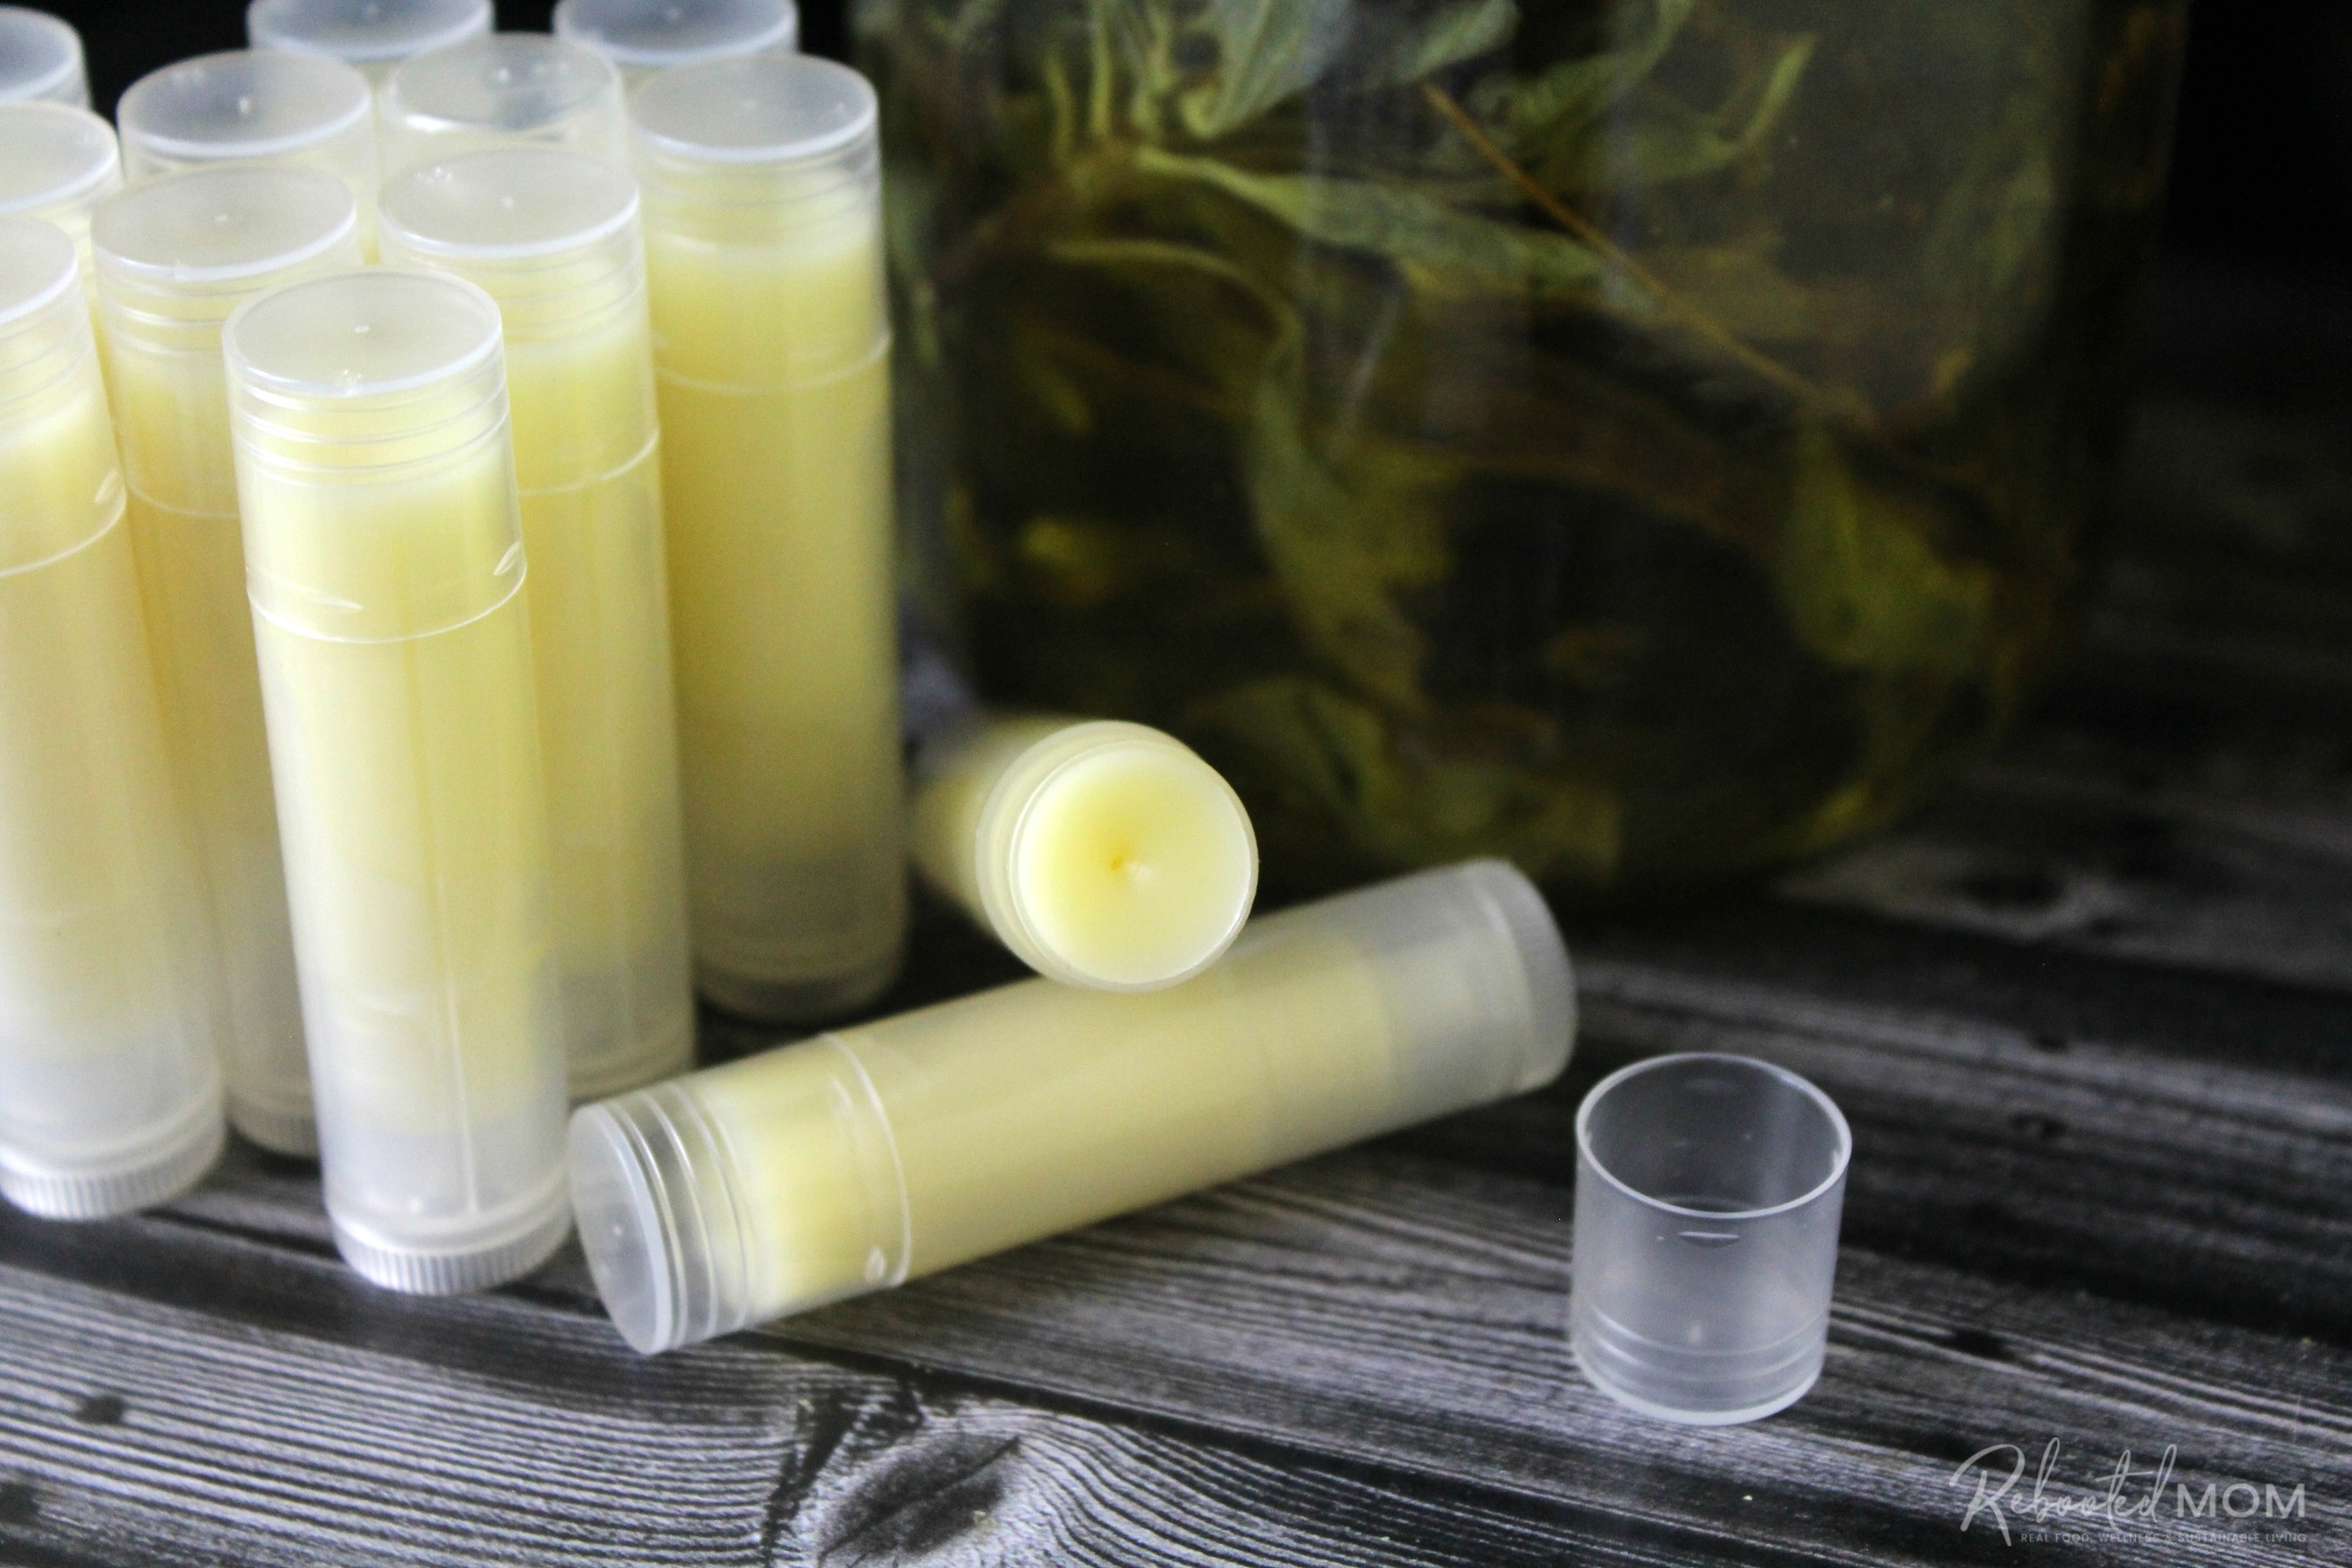 Learn how to make herbal lip balm using a simple yet flexible recipe of oils and skin-loving herbs.  This DIY makes a wonderful winter project or gift idea!